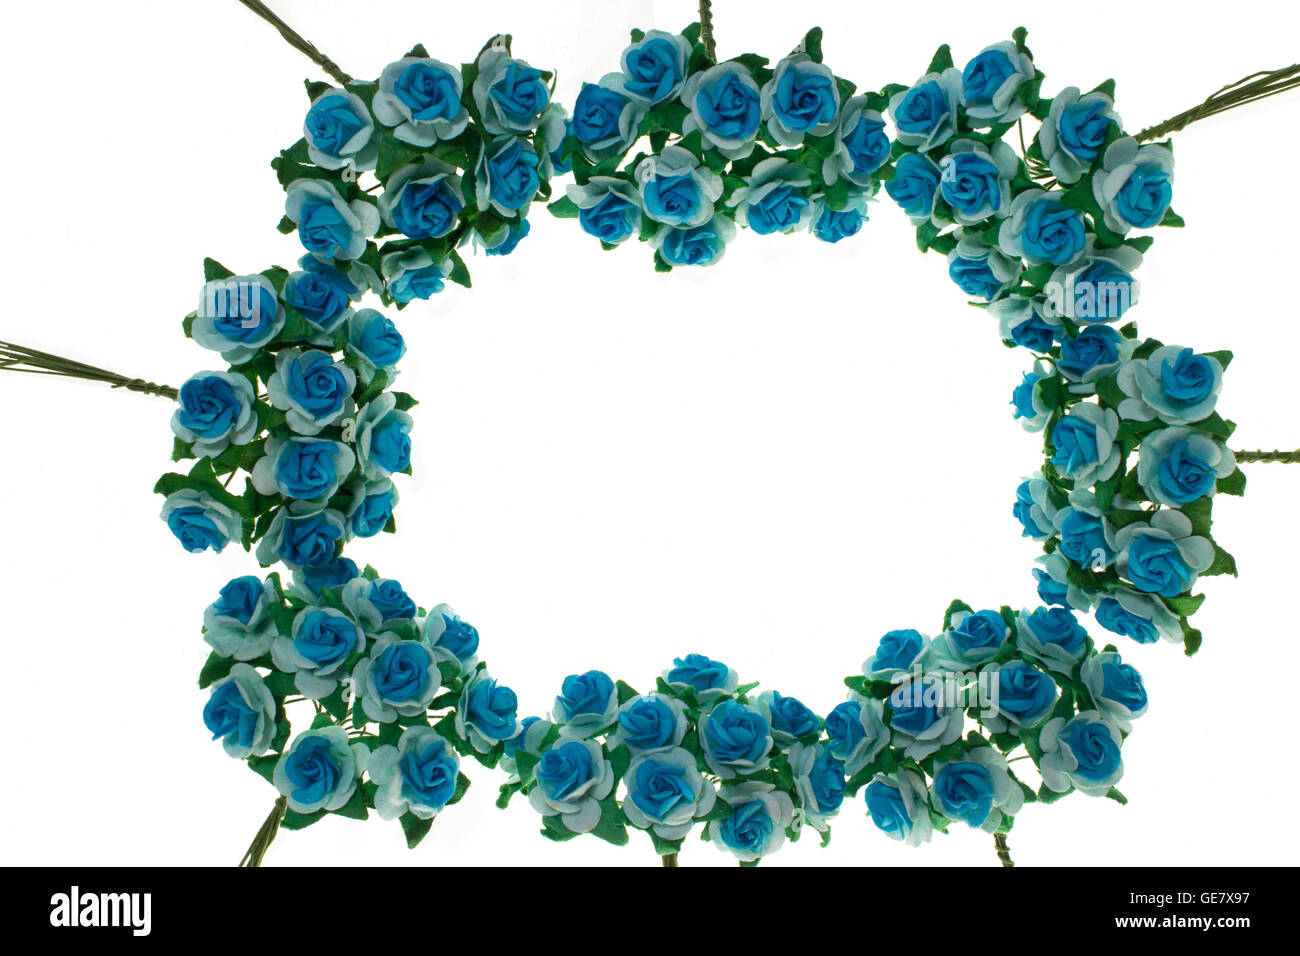 Spring flowering branches, blue flowers, no leaves, blossoms heart frame on white background. Stock Photo